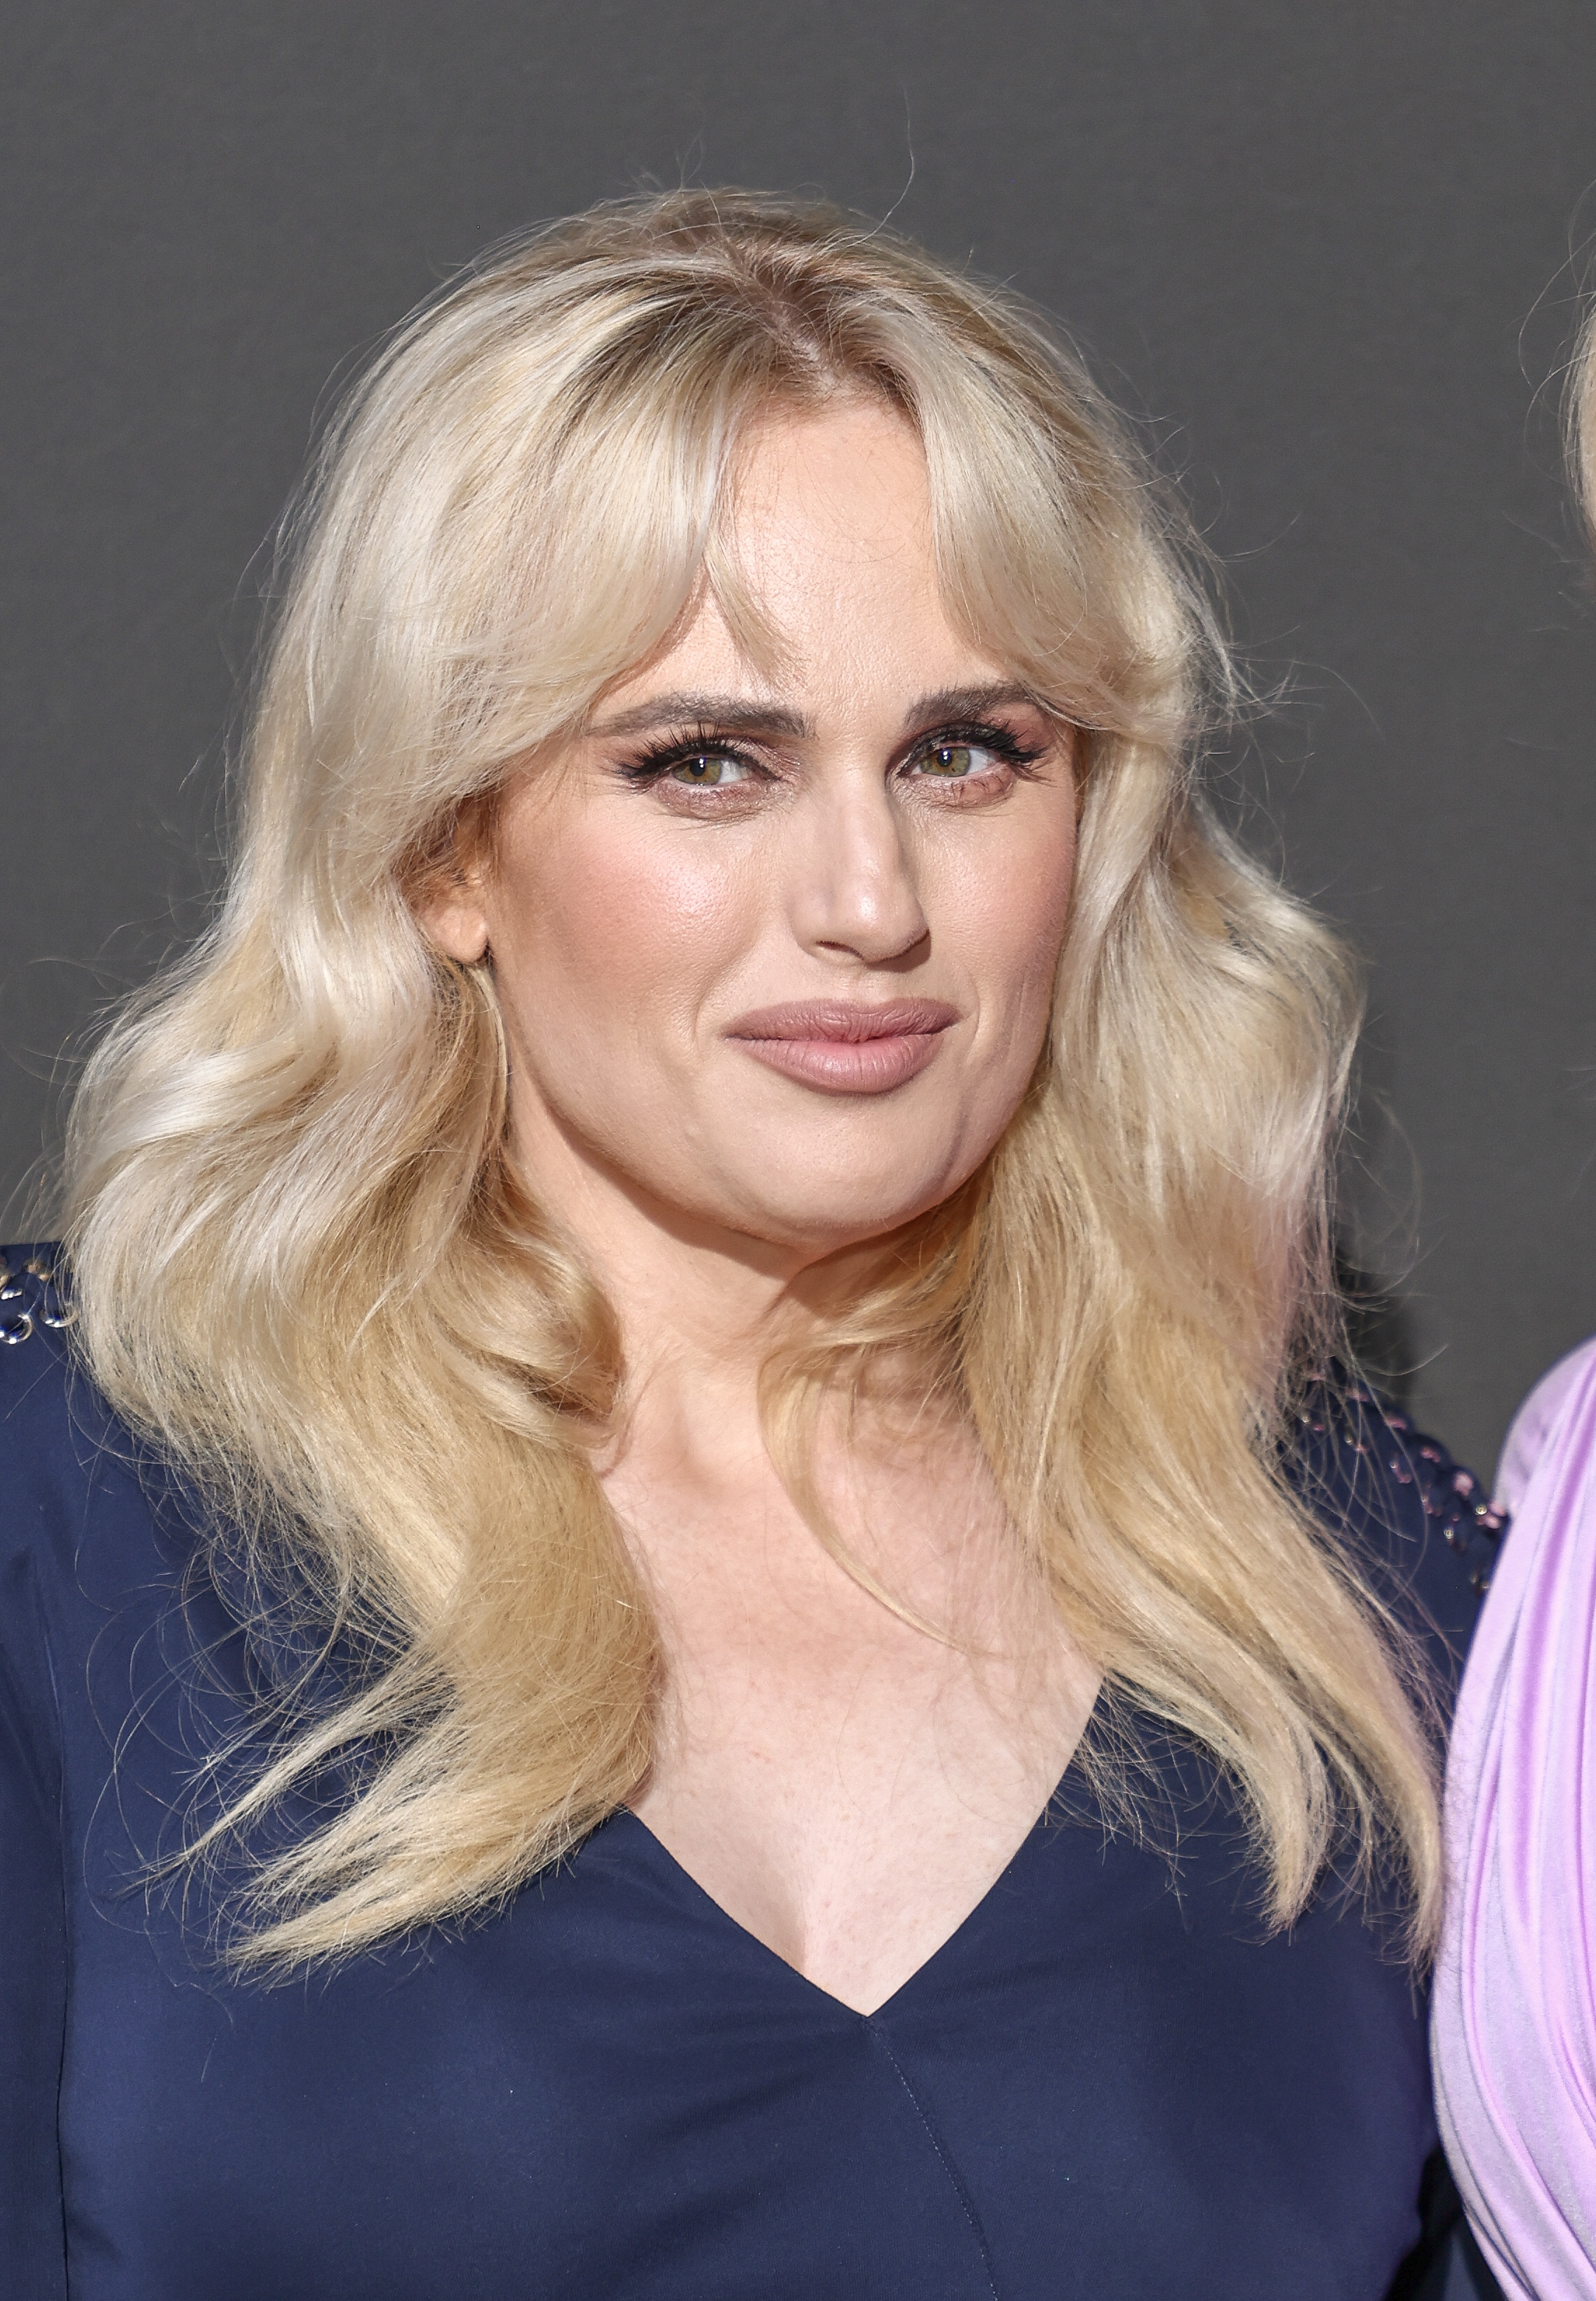 Close-up of Rebel Wilson smiling, in a navy embellished outfit